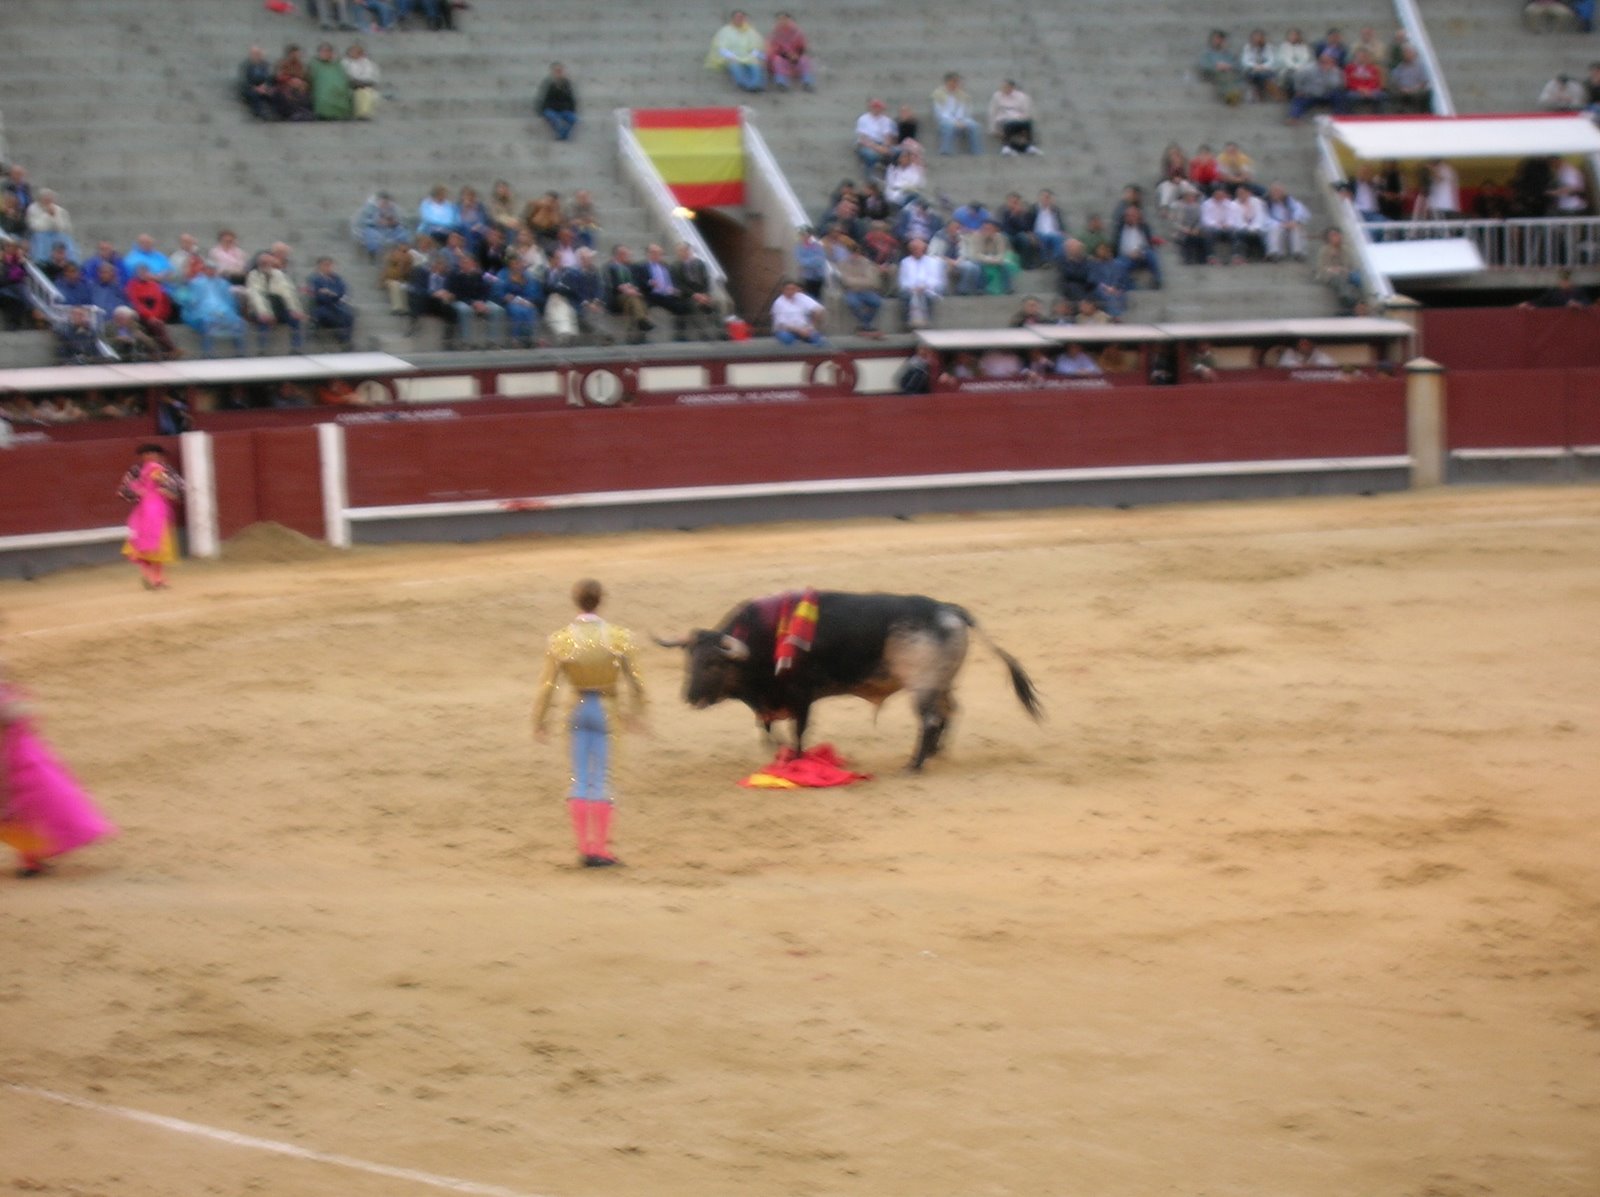 a bull stands with its mouth open while a small child holds up a frisbee